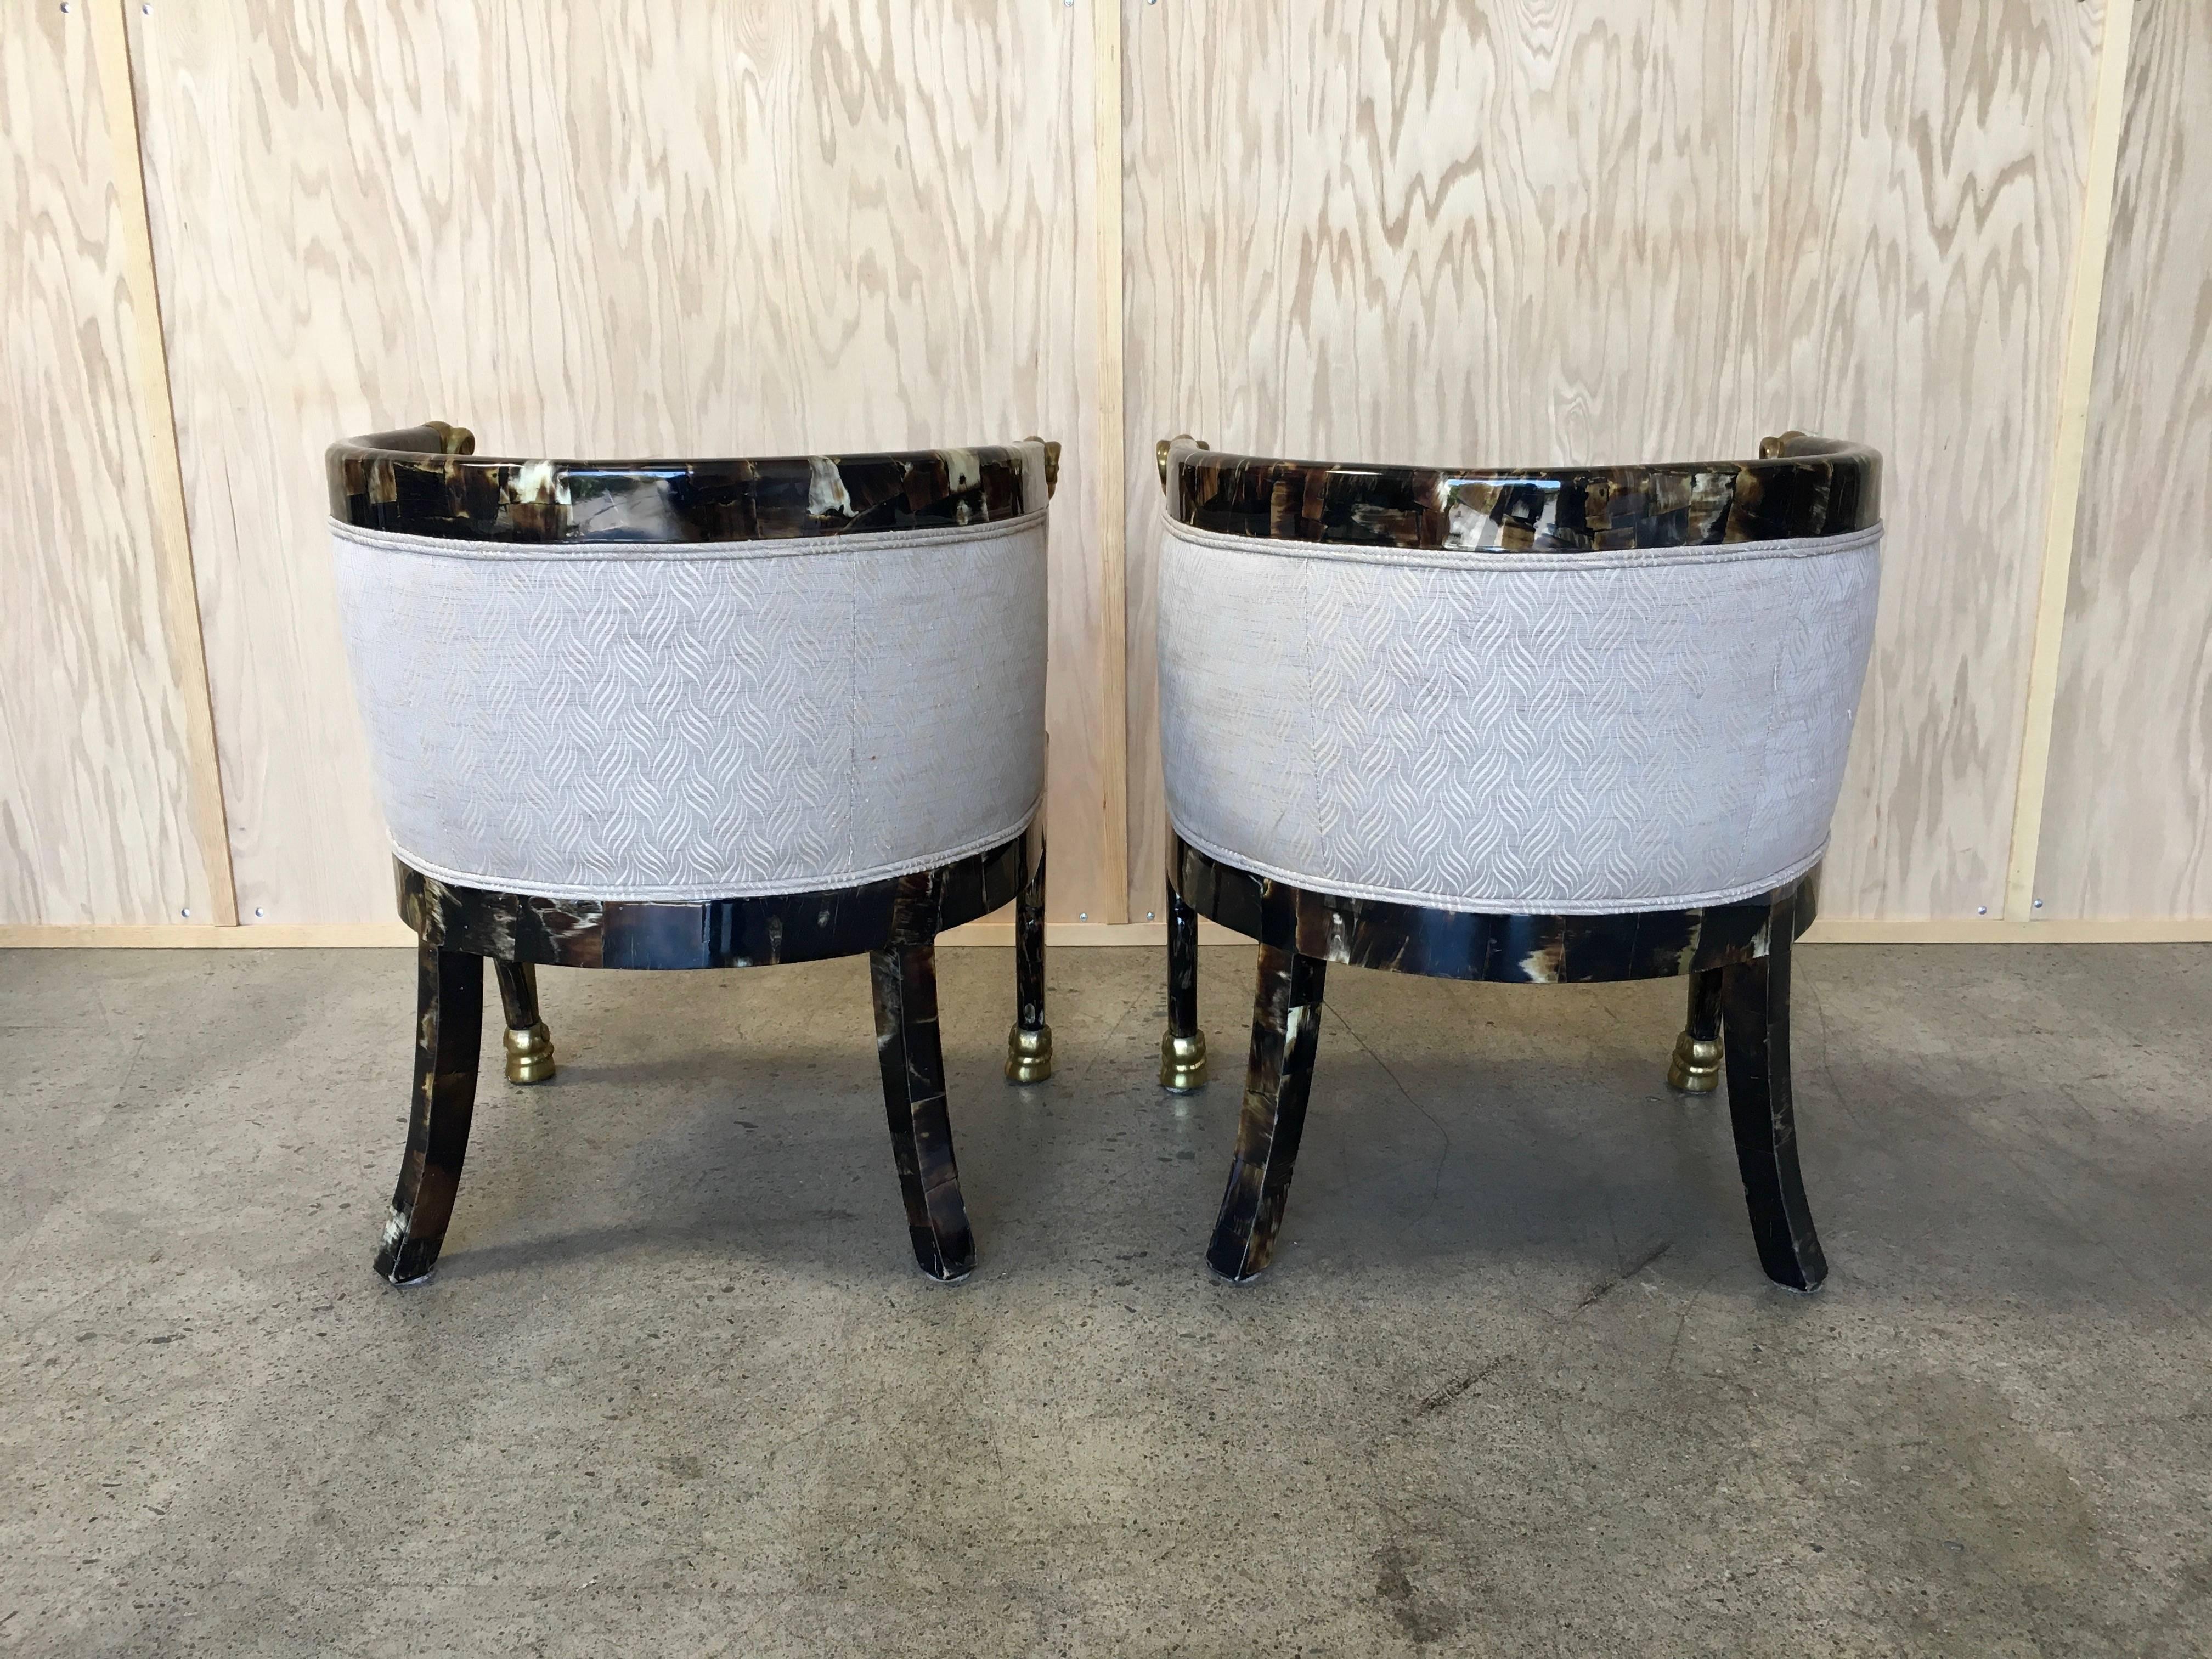 Veneer Pair of Steer Horn Covered Barrel Chairs with Brass Ram Heads